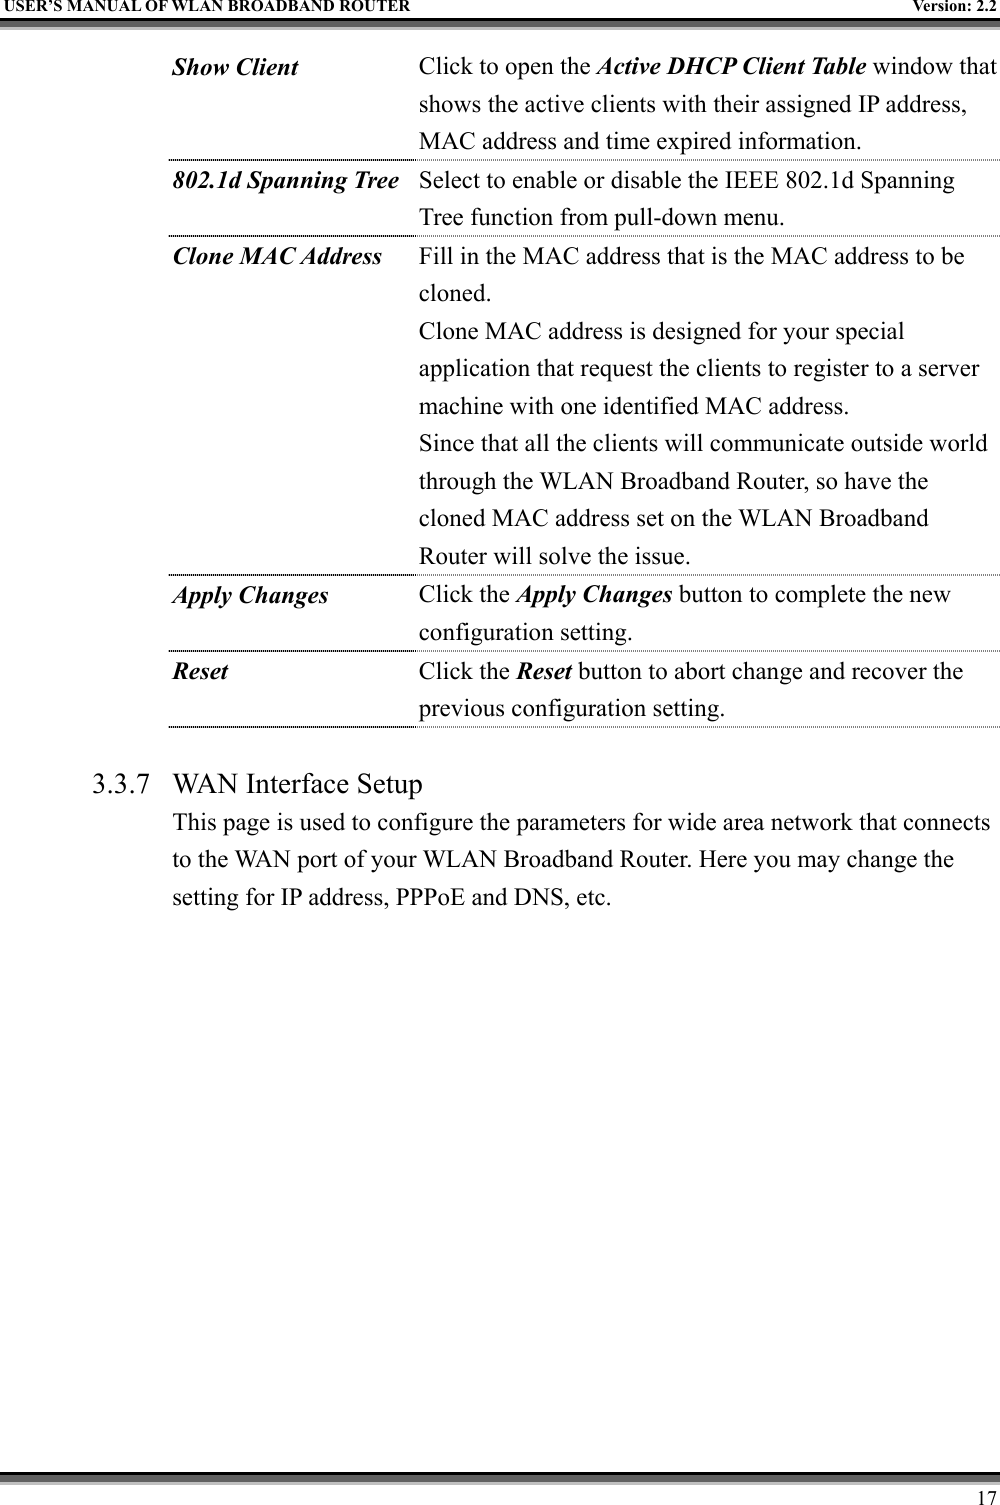   USER’S MANUAL OF WLAN BROADBAND ROUTER    Version: 2.2     17 Show Client  Click to open the Active DHCP Client Table window that shows the active clients with their assigned IP address, MAC address and time expired information. 802.1d Spanning Tree Select to enable or disable the IEEE 802.1d Spanning Tree function from pull-down menu. Clone MAC Address  Fill in the MAC address that is the MAC address to be cloned. Clone MAC address is designed for your special application that request the clients to register to a server machine with one identified MAC address. Since that all the clients will communicate outside world through the WLAN Broadband Router, so have the cloned MAC address set on the WLAN Broadband Router will solve the issue. Apply Changes Click the Apply Changes button to complete the new configuration setting. Reset  Click the Reset button to abort change and recover the previous configuration setting.  3.3.7  WAN Interface Setup This page is used to configure the parameters for wide area network that connects to the WAN port of your WLAN Broadband Router. Here you may change the setting for IP address, PPPoE and DNS, etc.  